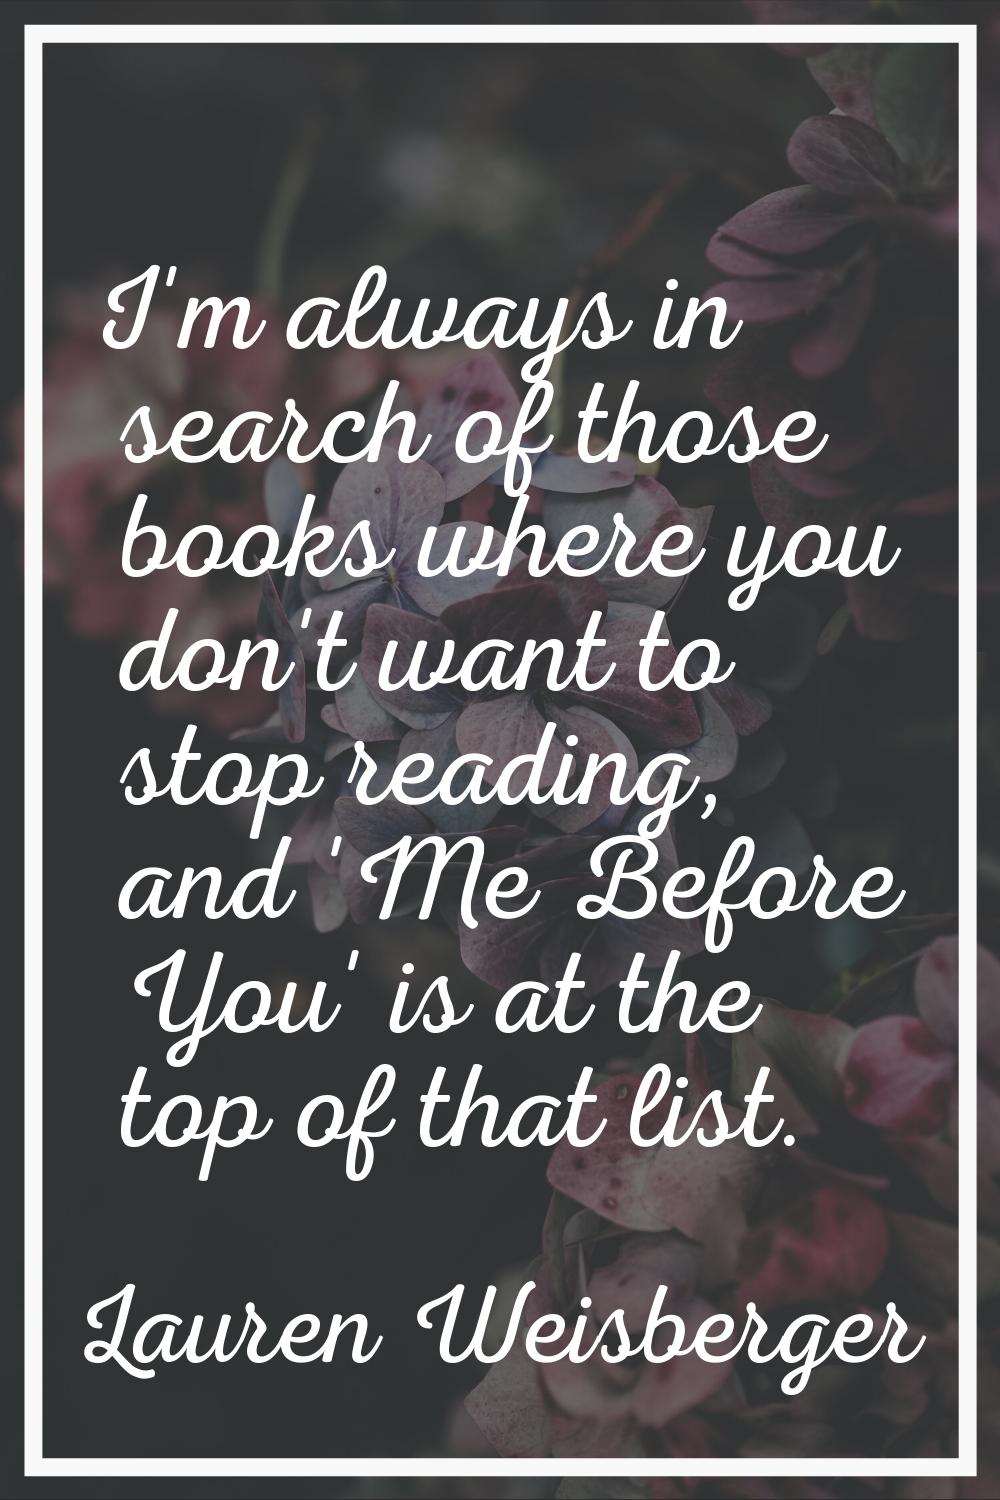 I'm always in search of those books where you don't want to stop reading, and 'Me Before You' is at